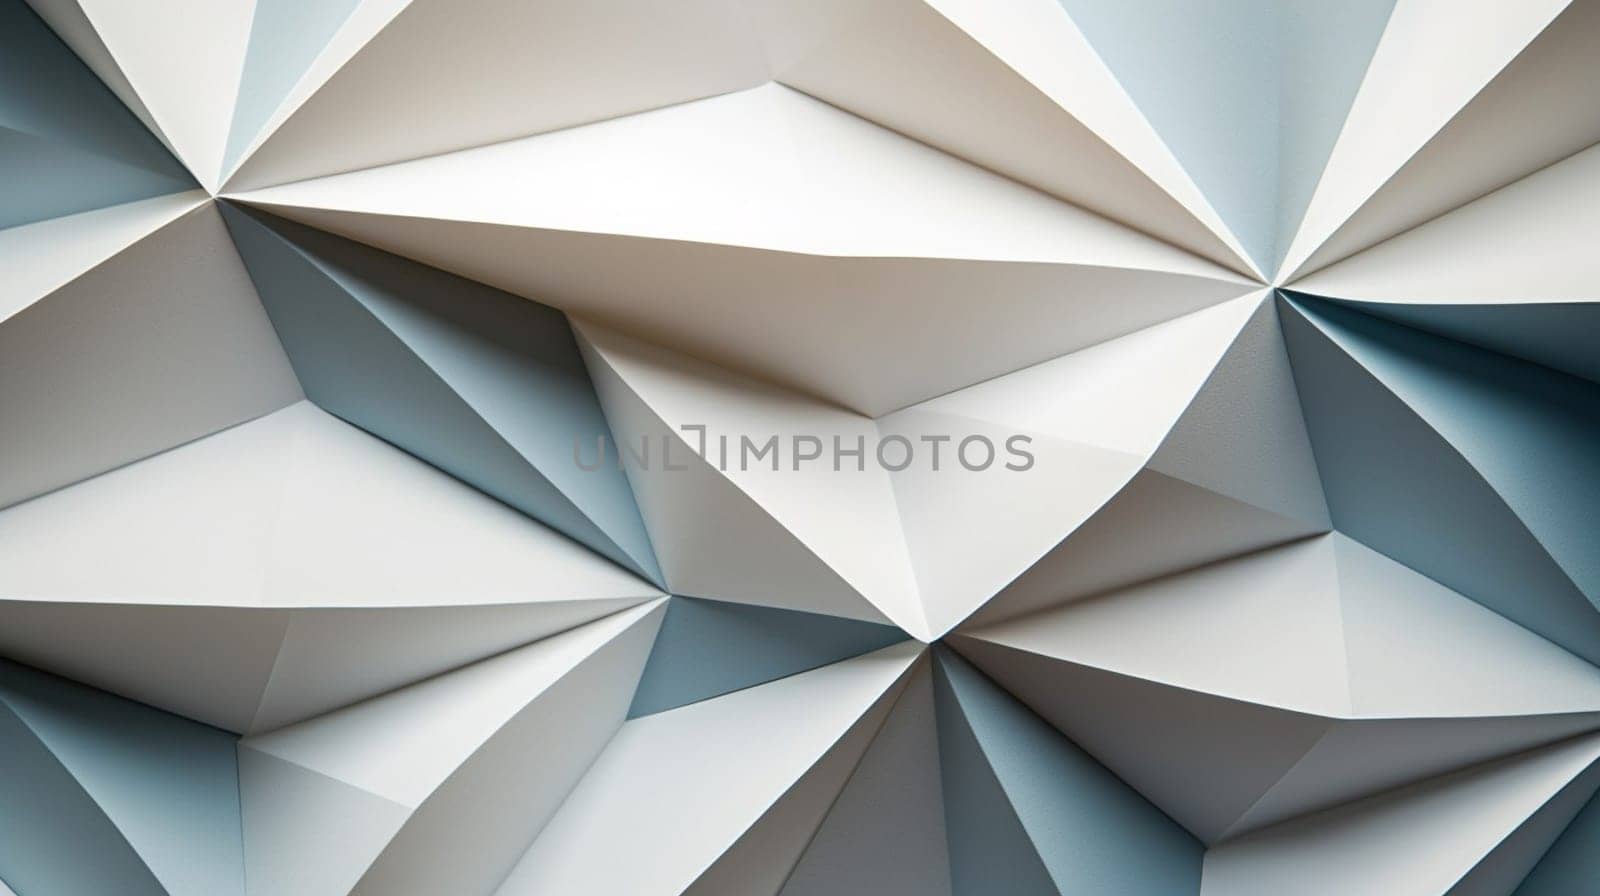 Paper abstract geometric pattern with blue and white shades creating a modern design by kizuneko